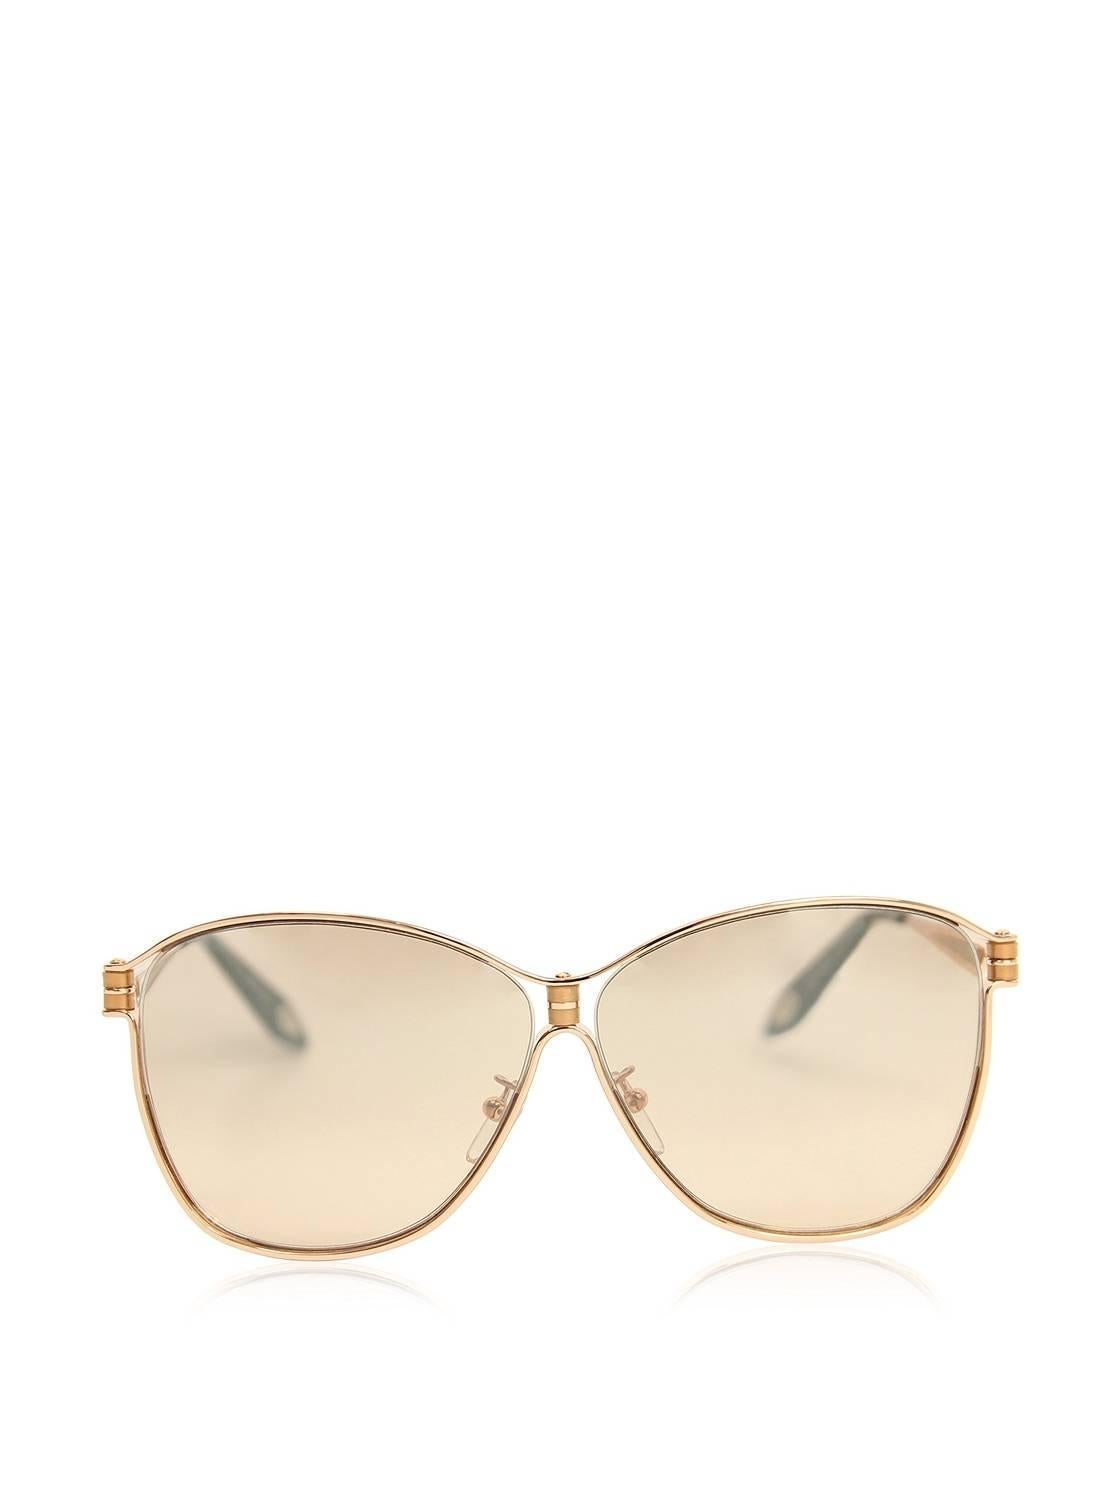 Givenchy SGVA52 A39X (Bronze with Brown Gradient with Mirror effect lenses) Sizes:. Lens: 63mm, bridge: 10mm, arms: 140mm

Metal frame
Mirrored lens
Non-polarized
Lens width: 63 mm
Bridge: 10 mm